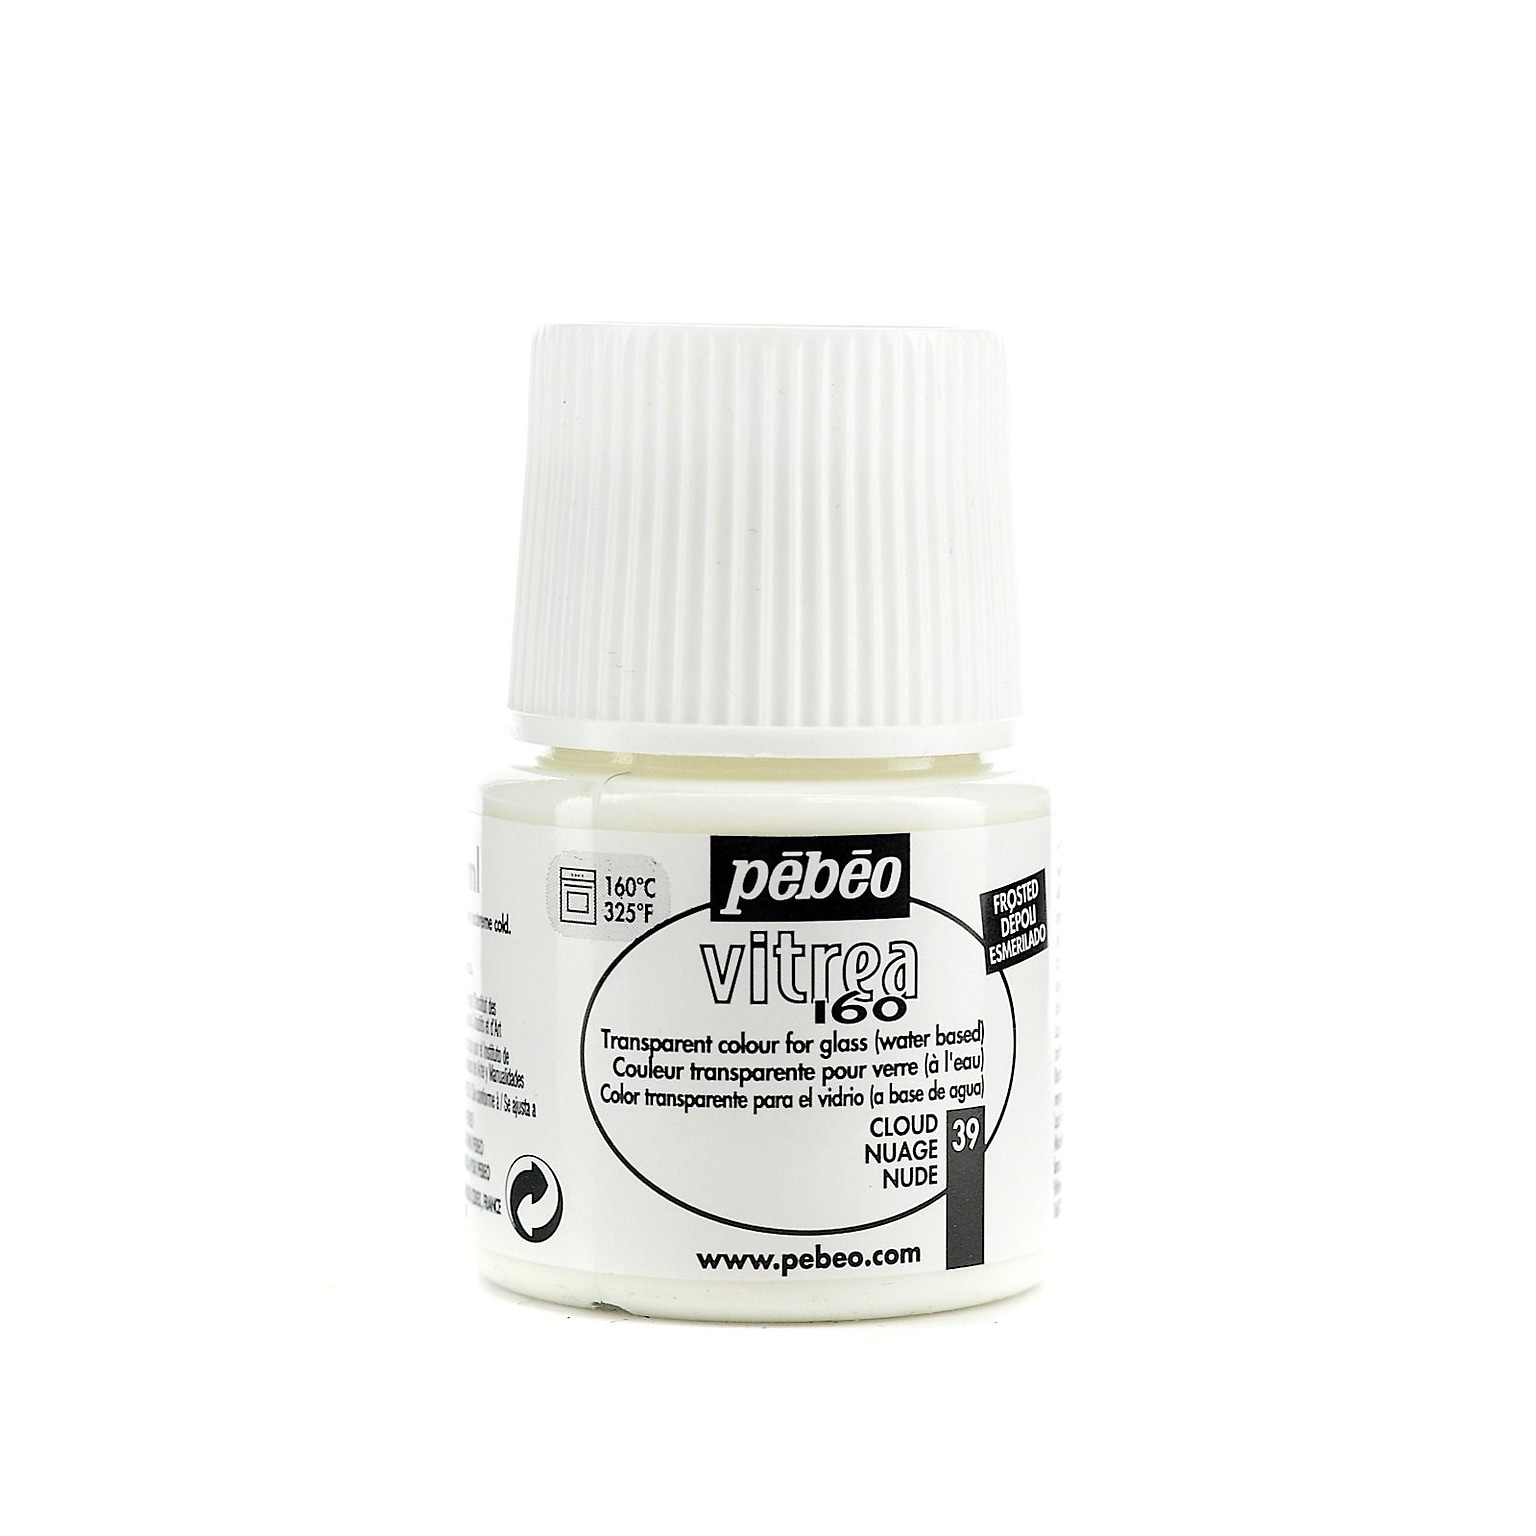 Pebeo Vitrea 160 Glass Paint Cloud Frosted 45 Ml [Pack Of 3]